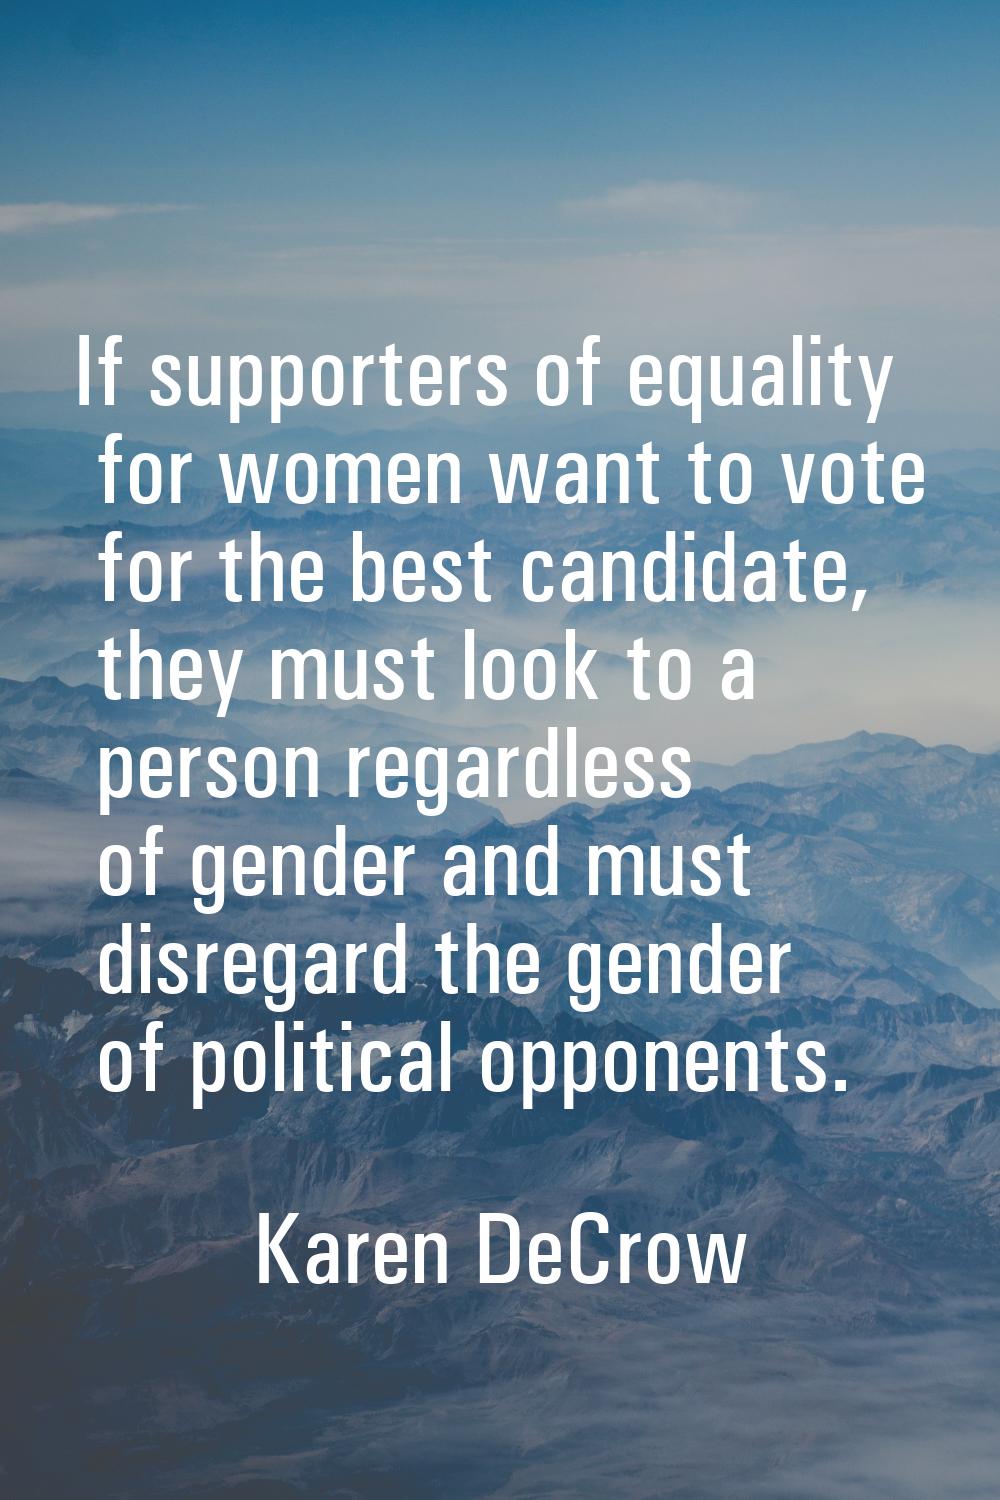 If supporters of equality for women want to vote for the best candidate, they must look to a person